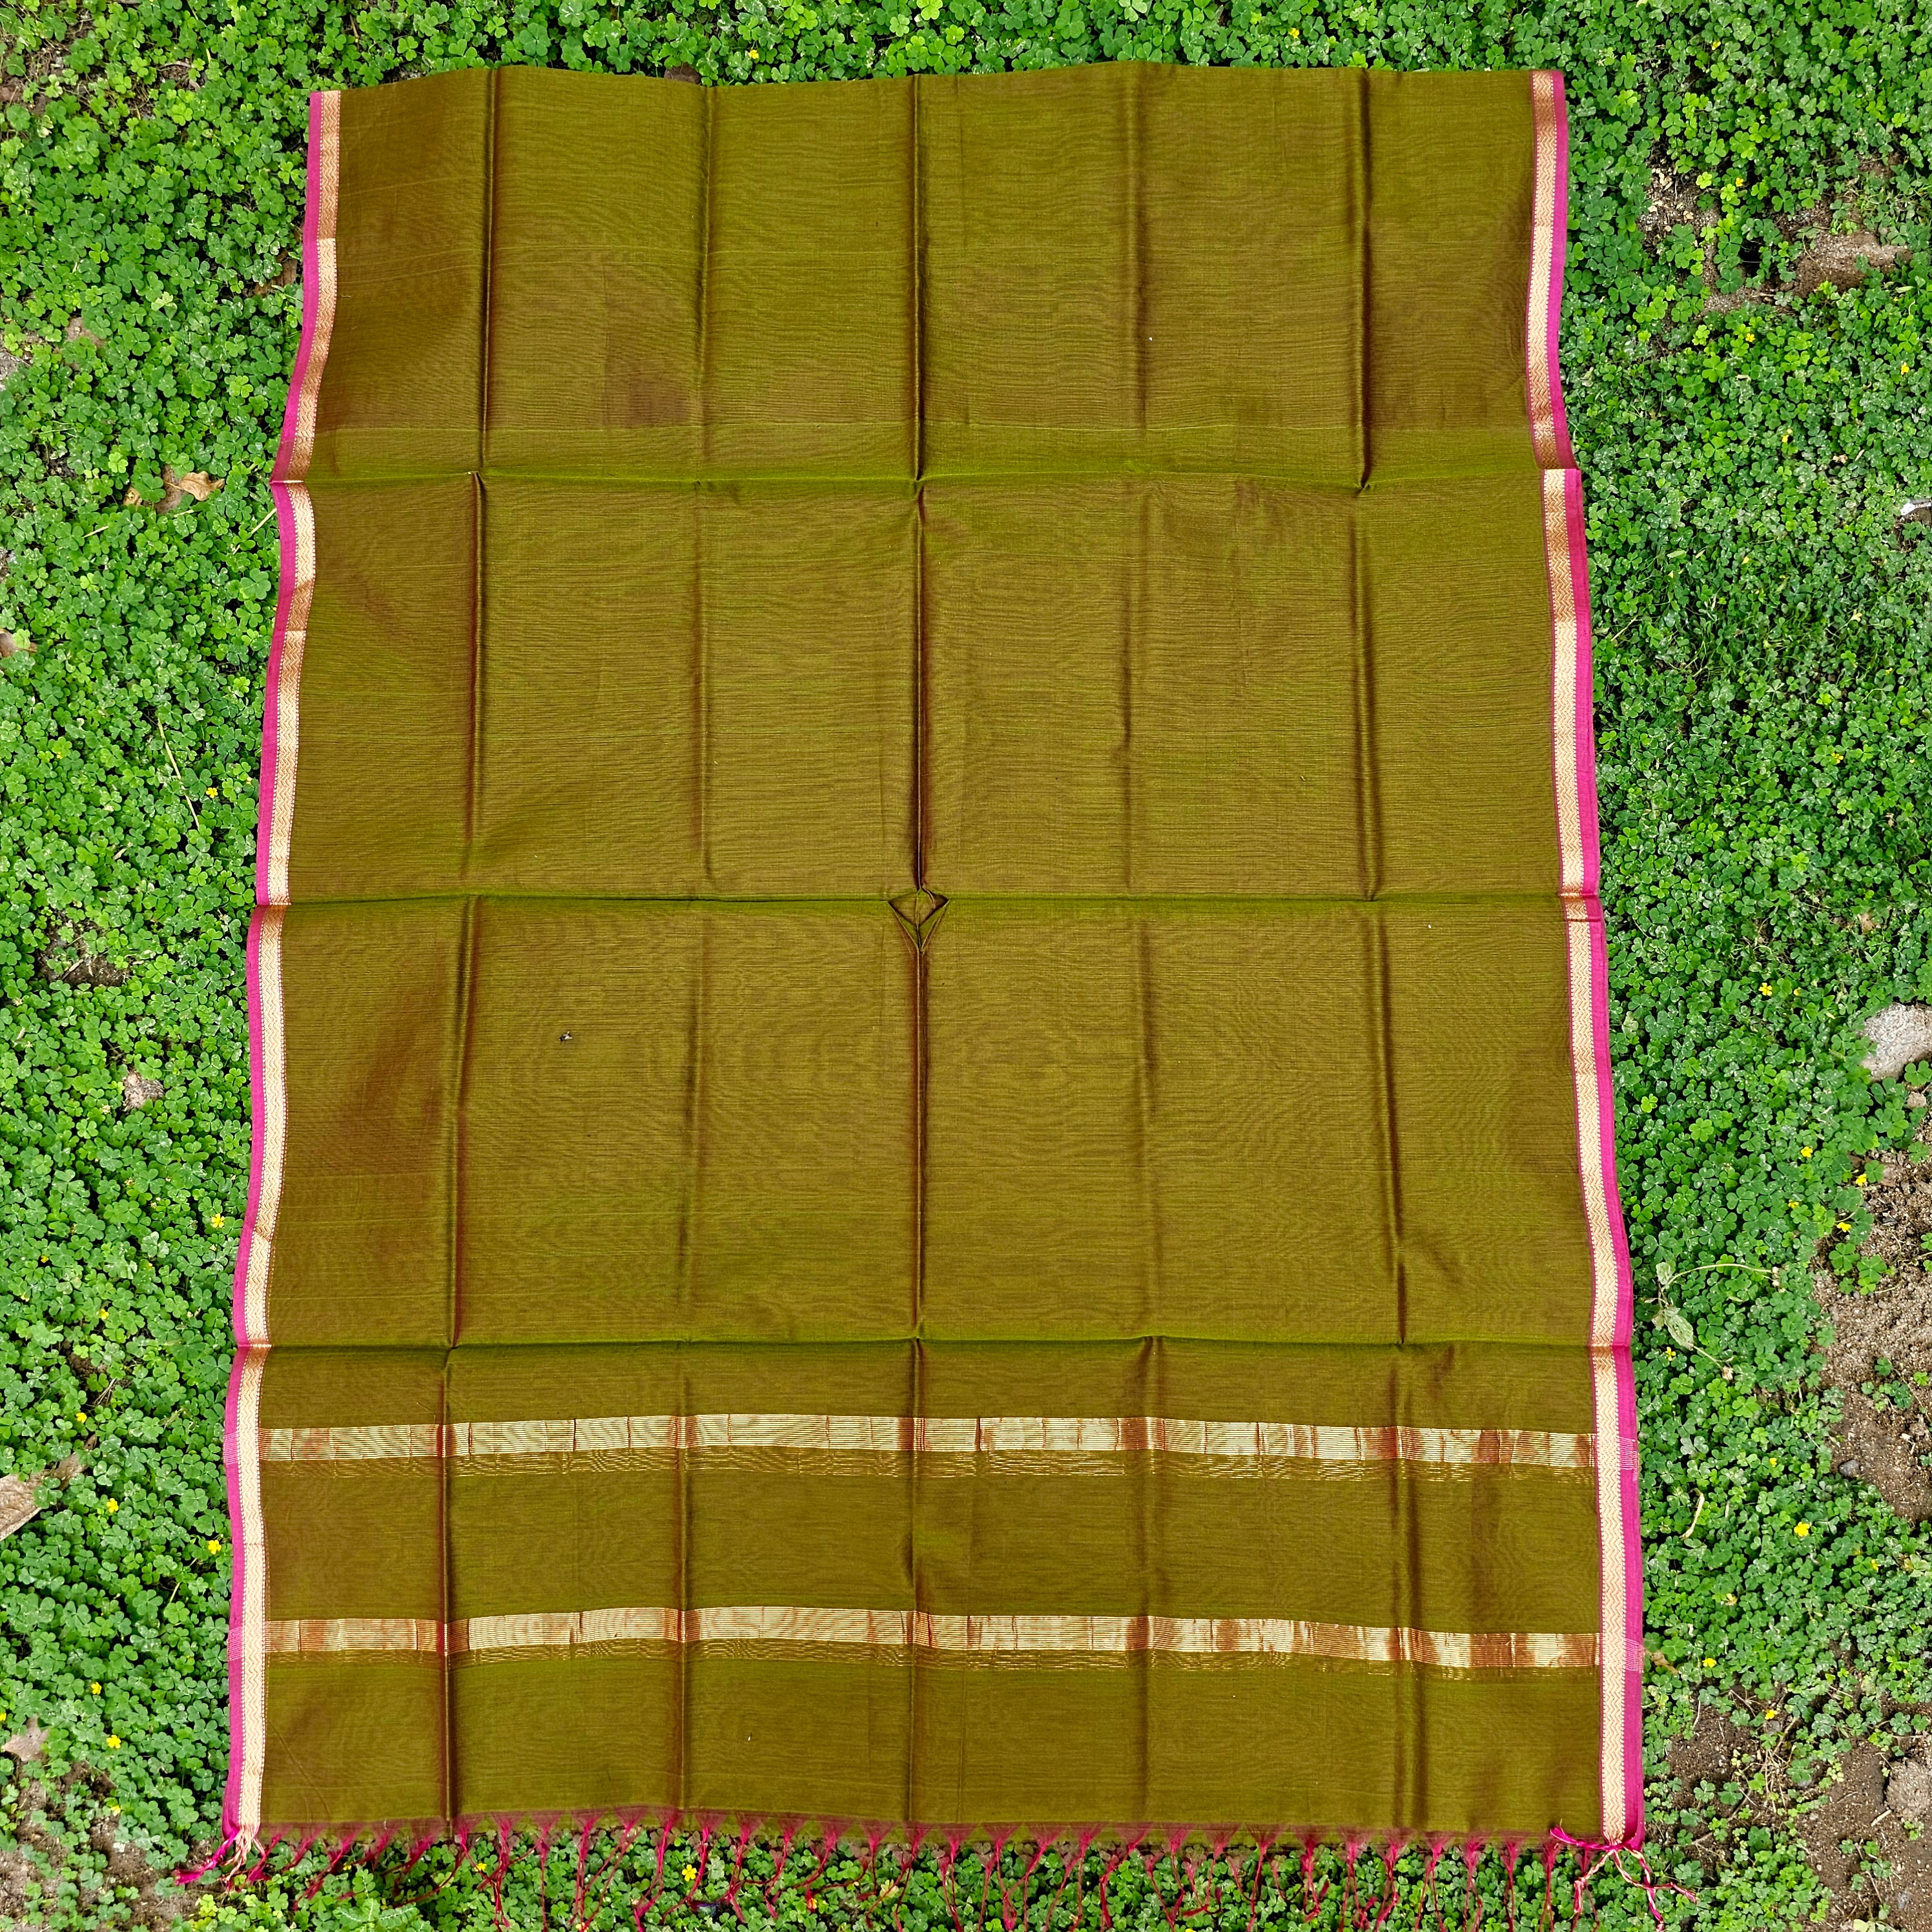 Dupatta in cross shade of Green and Rani Pink with Gold Zari Borders.